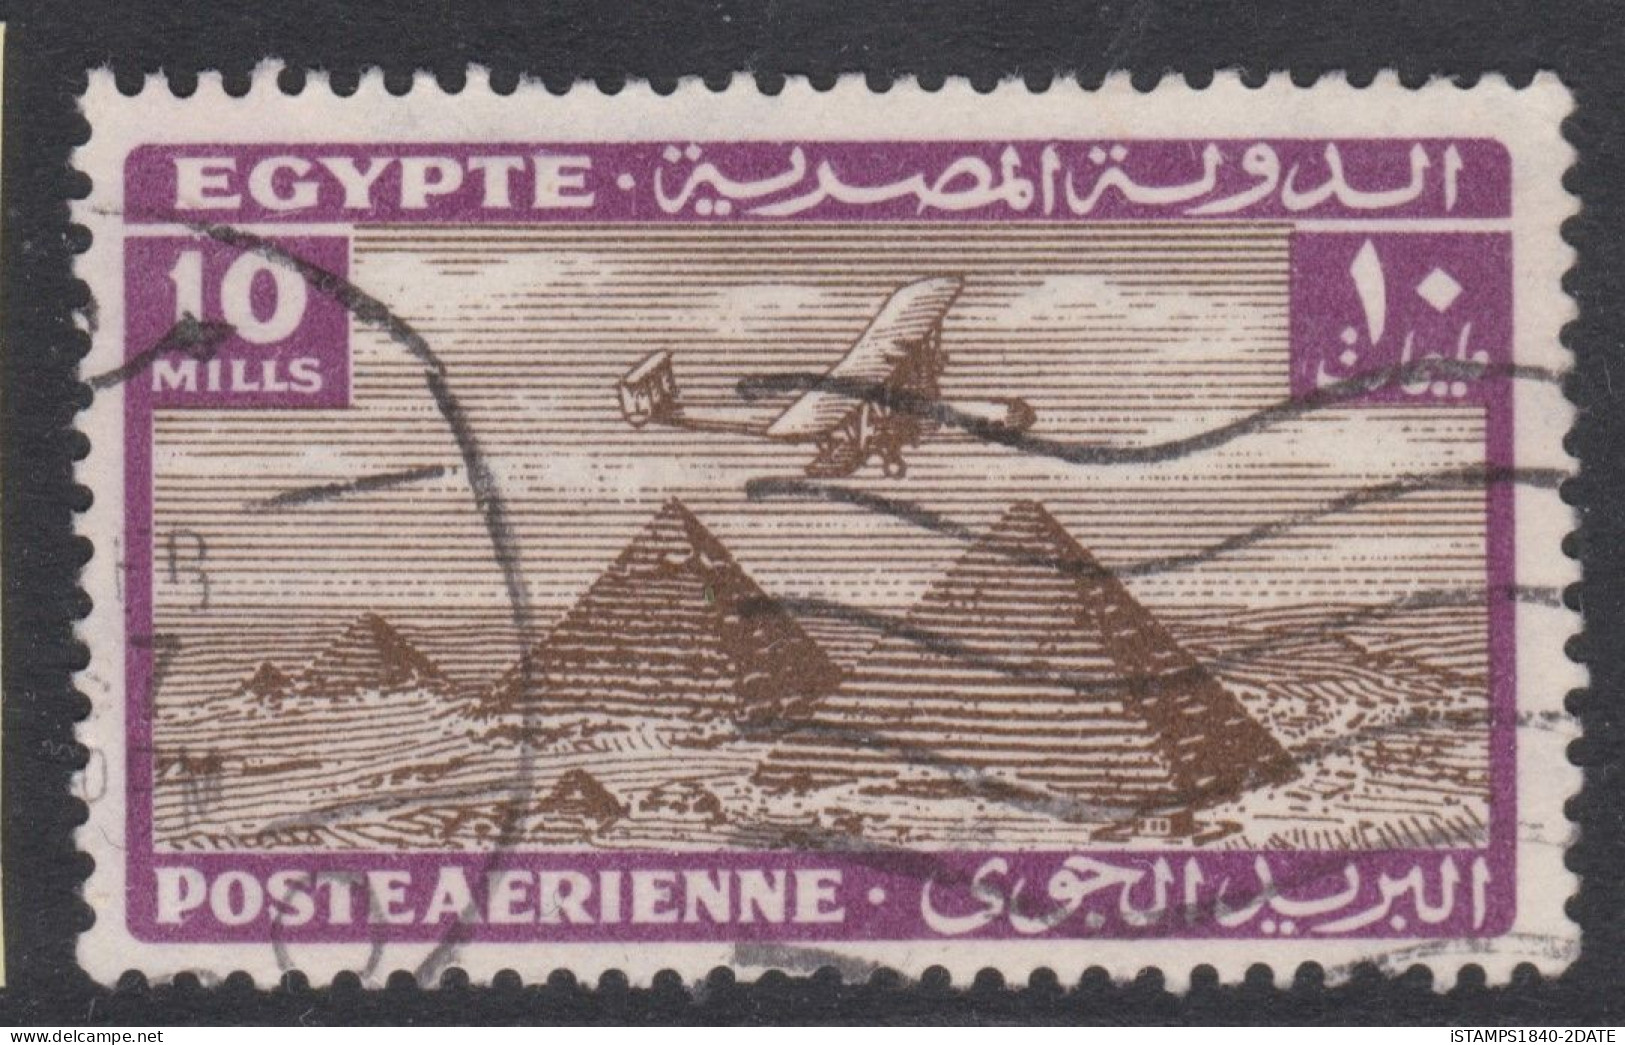 00653/ Egypt 1934/38 Air Mail 10m Used Plane Over Pyramid - Airmail